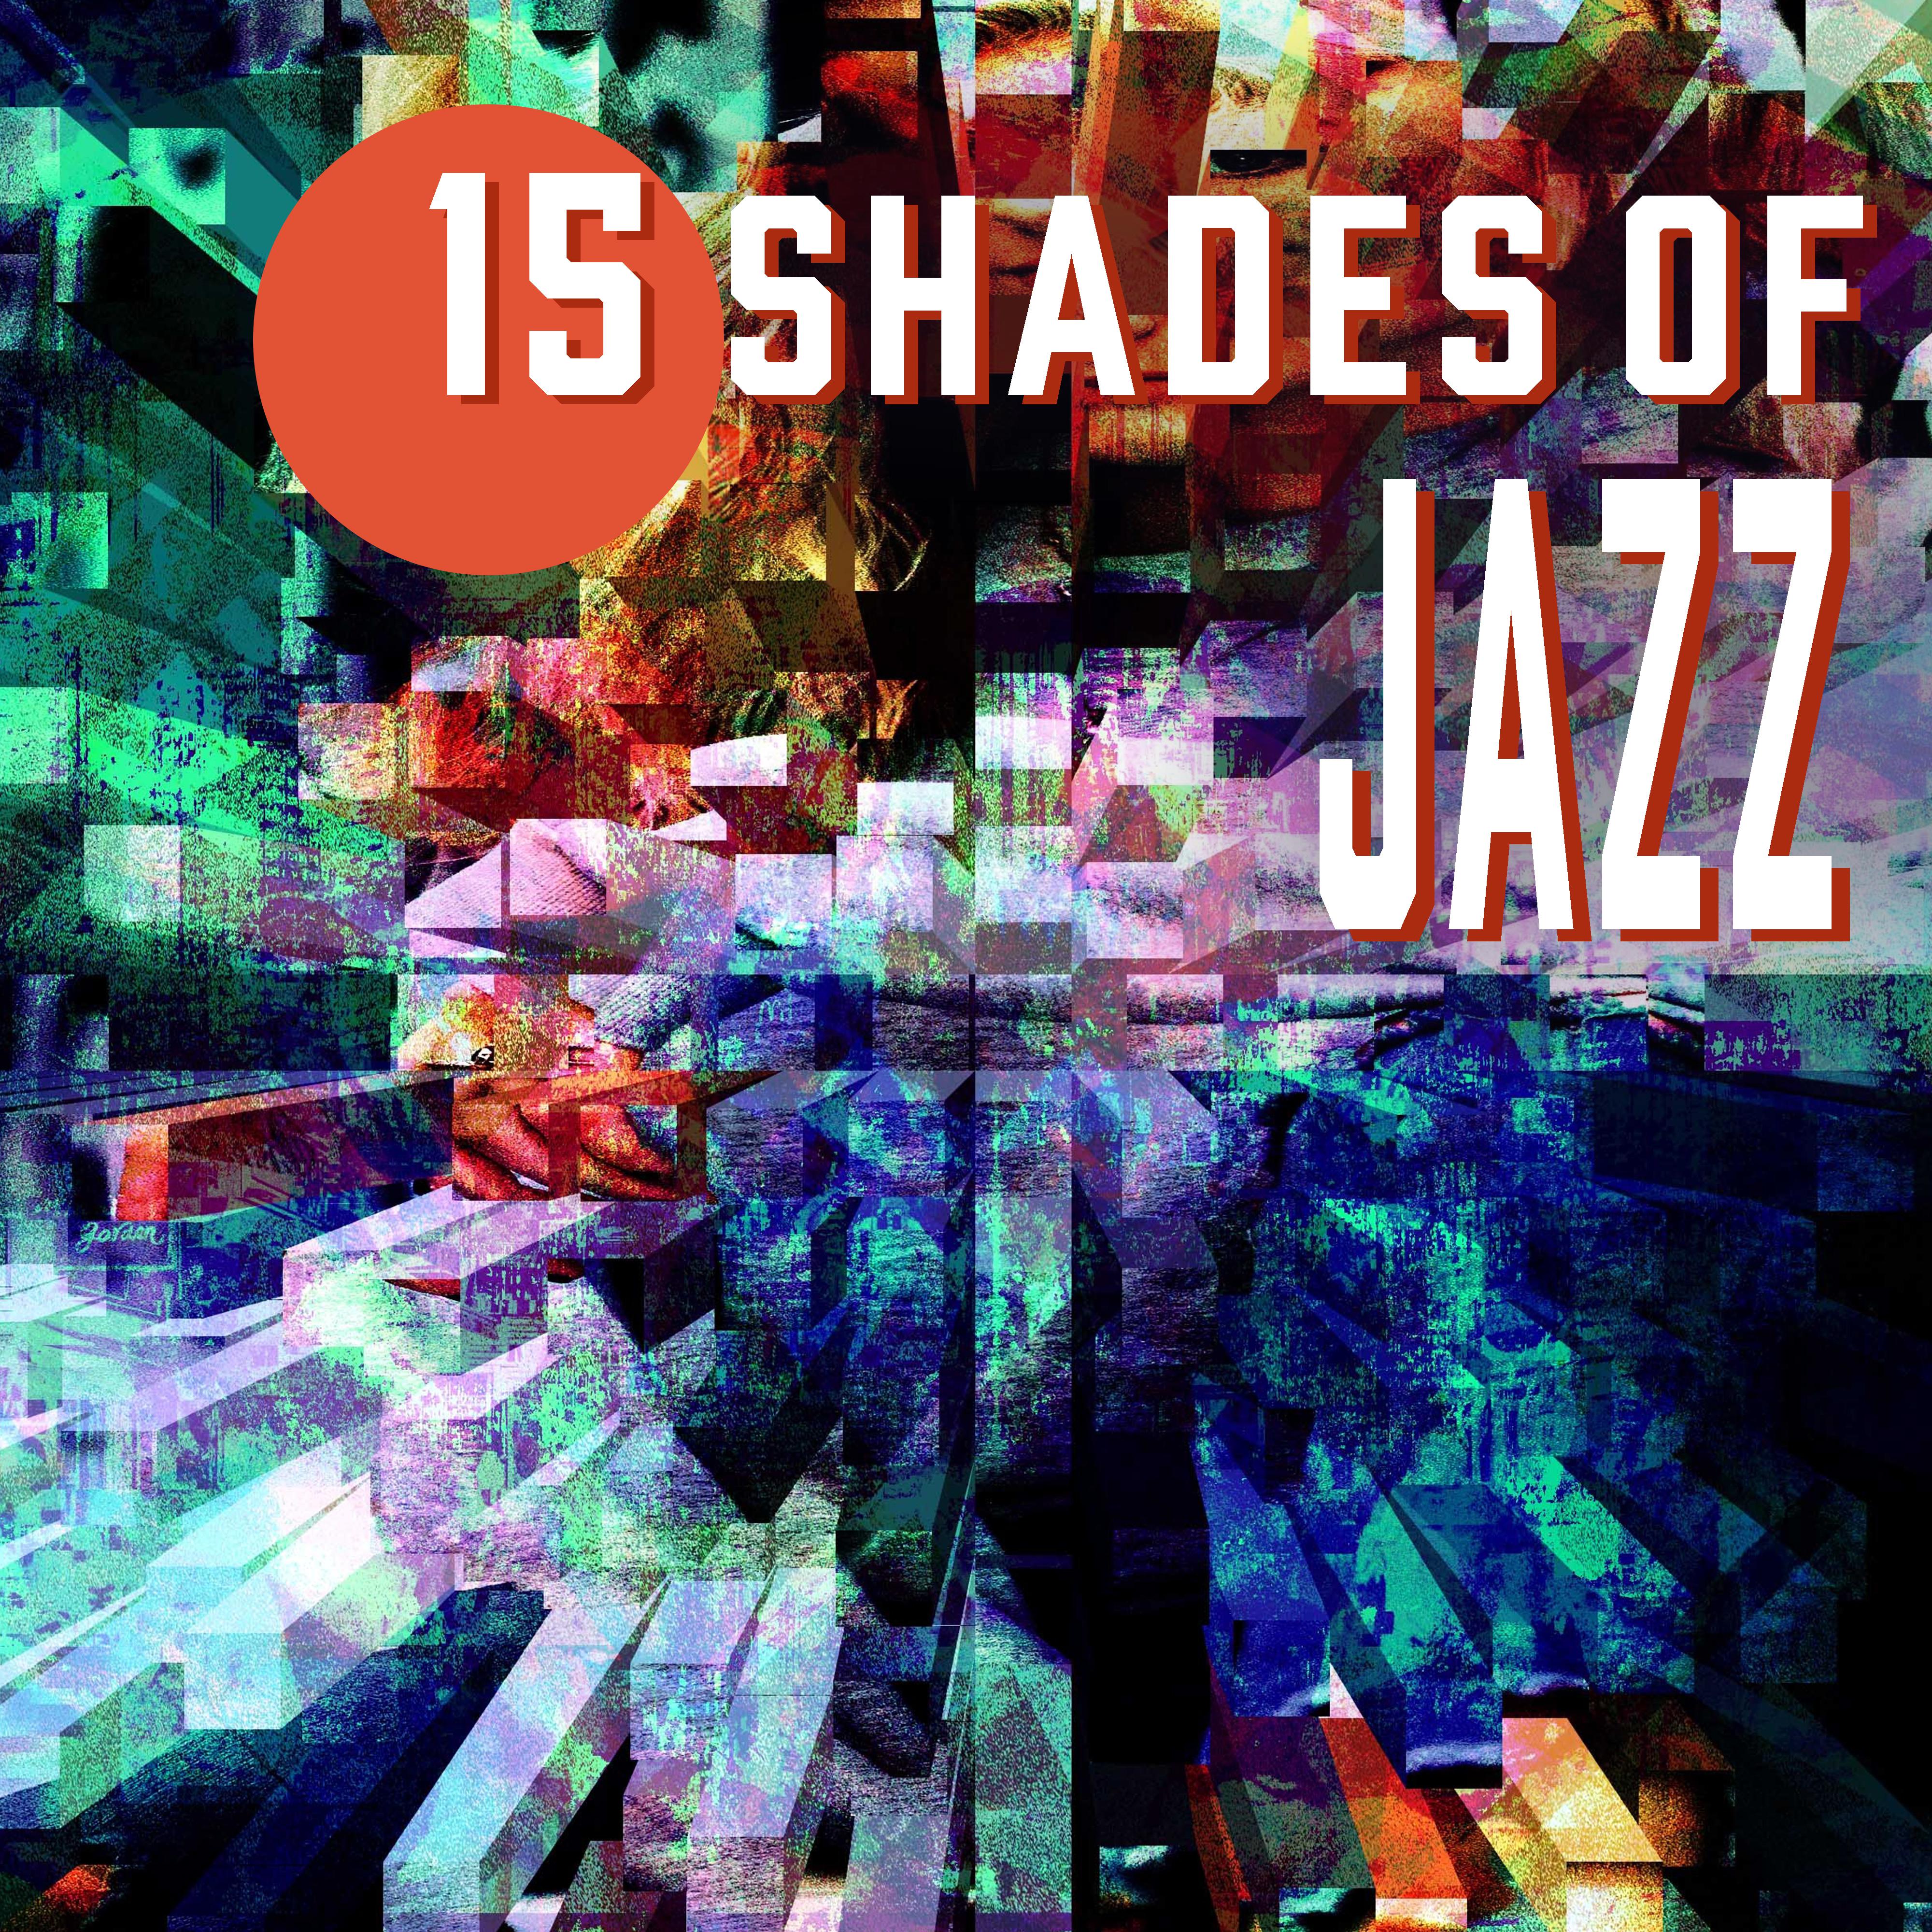 15 Shades of Jazz – Soft Music for Relaxation, Chill Out, Stress Relief, Sounds of Piano, Pure Rest, Night Jazz Sounds